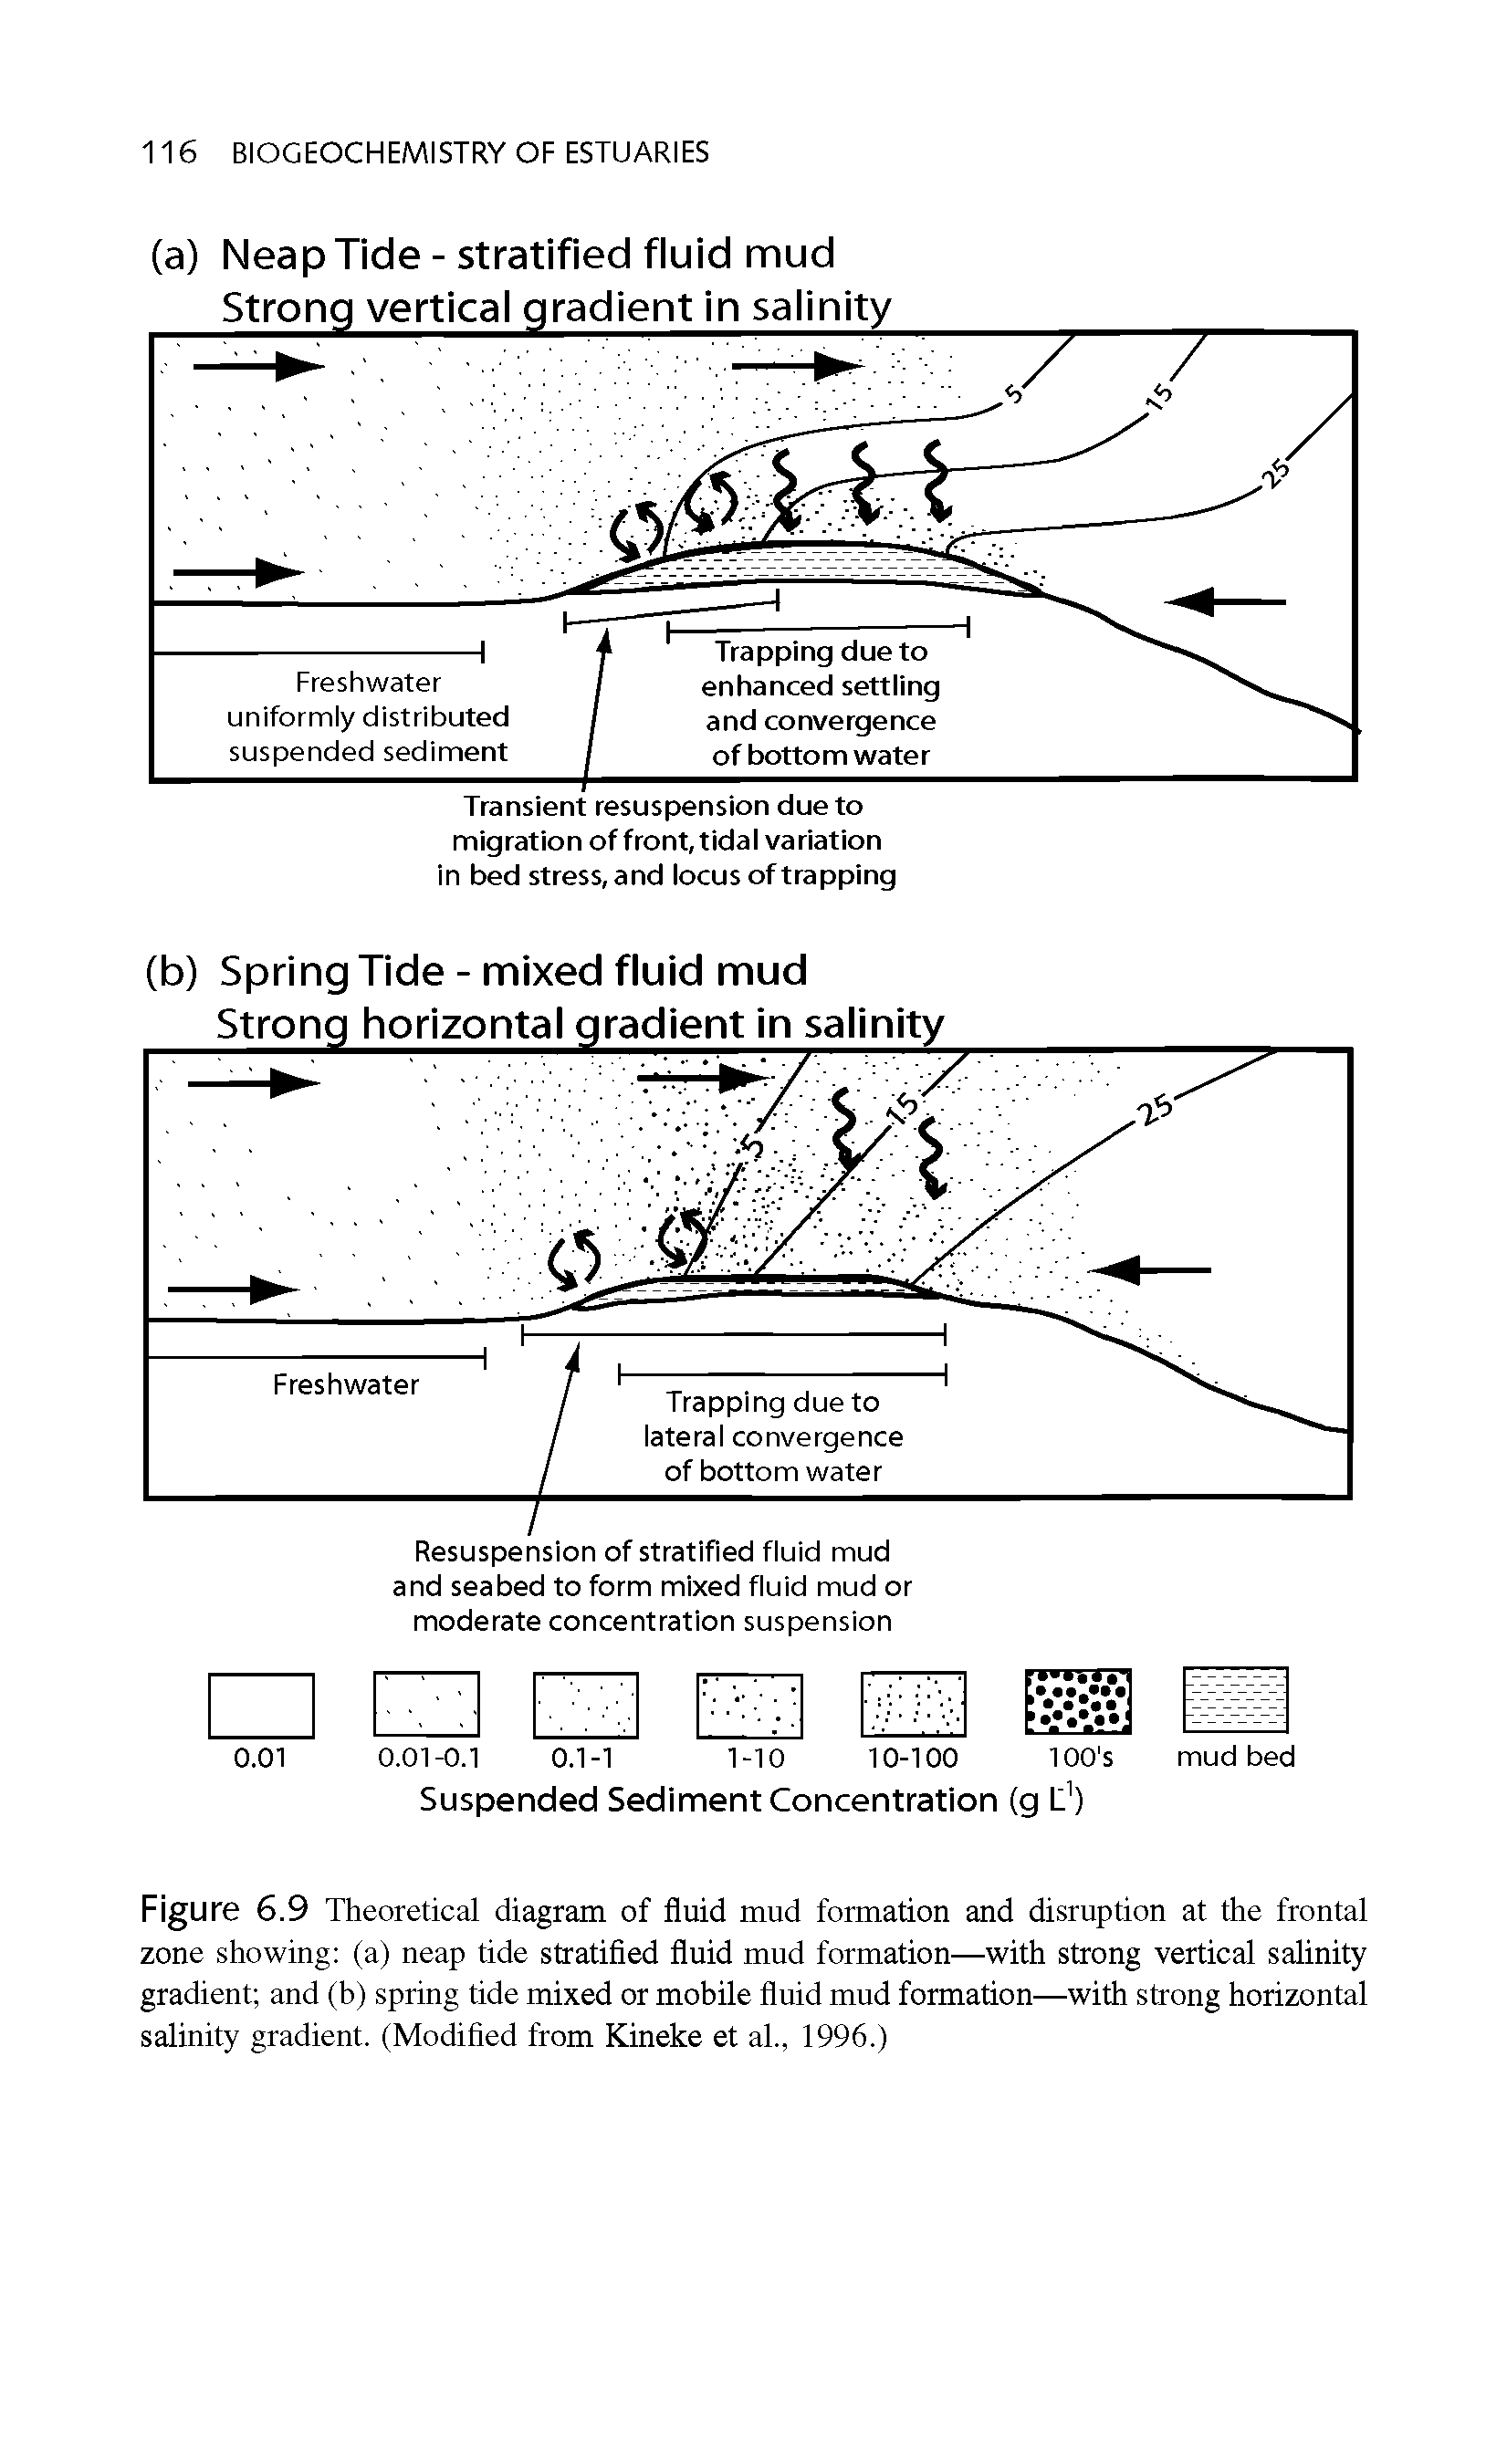 Figure 6.9 Theoretical diagram of fluid mud formation and disruption at the frontal zone showing (a) neap tide stratified fluid mud formation—with strong vertical salinity gradient and (b) spring tide mixed or mobile fluid mud formation—with strong horizontal salinity gradient. (Modified from Kineke et al., 1996.)...